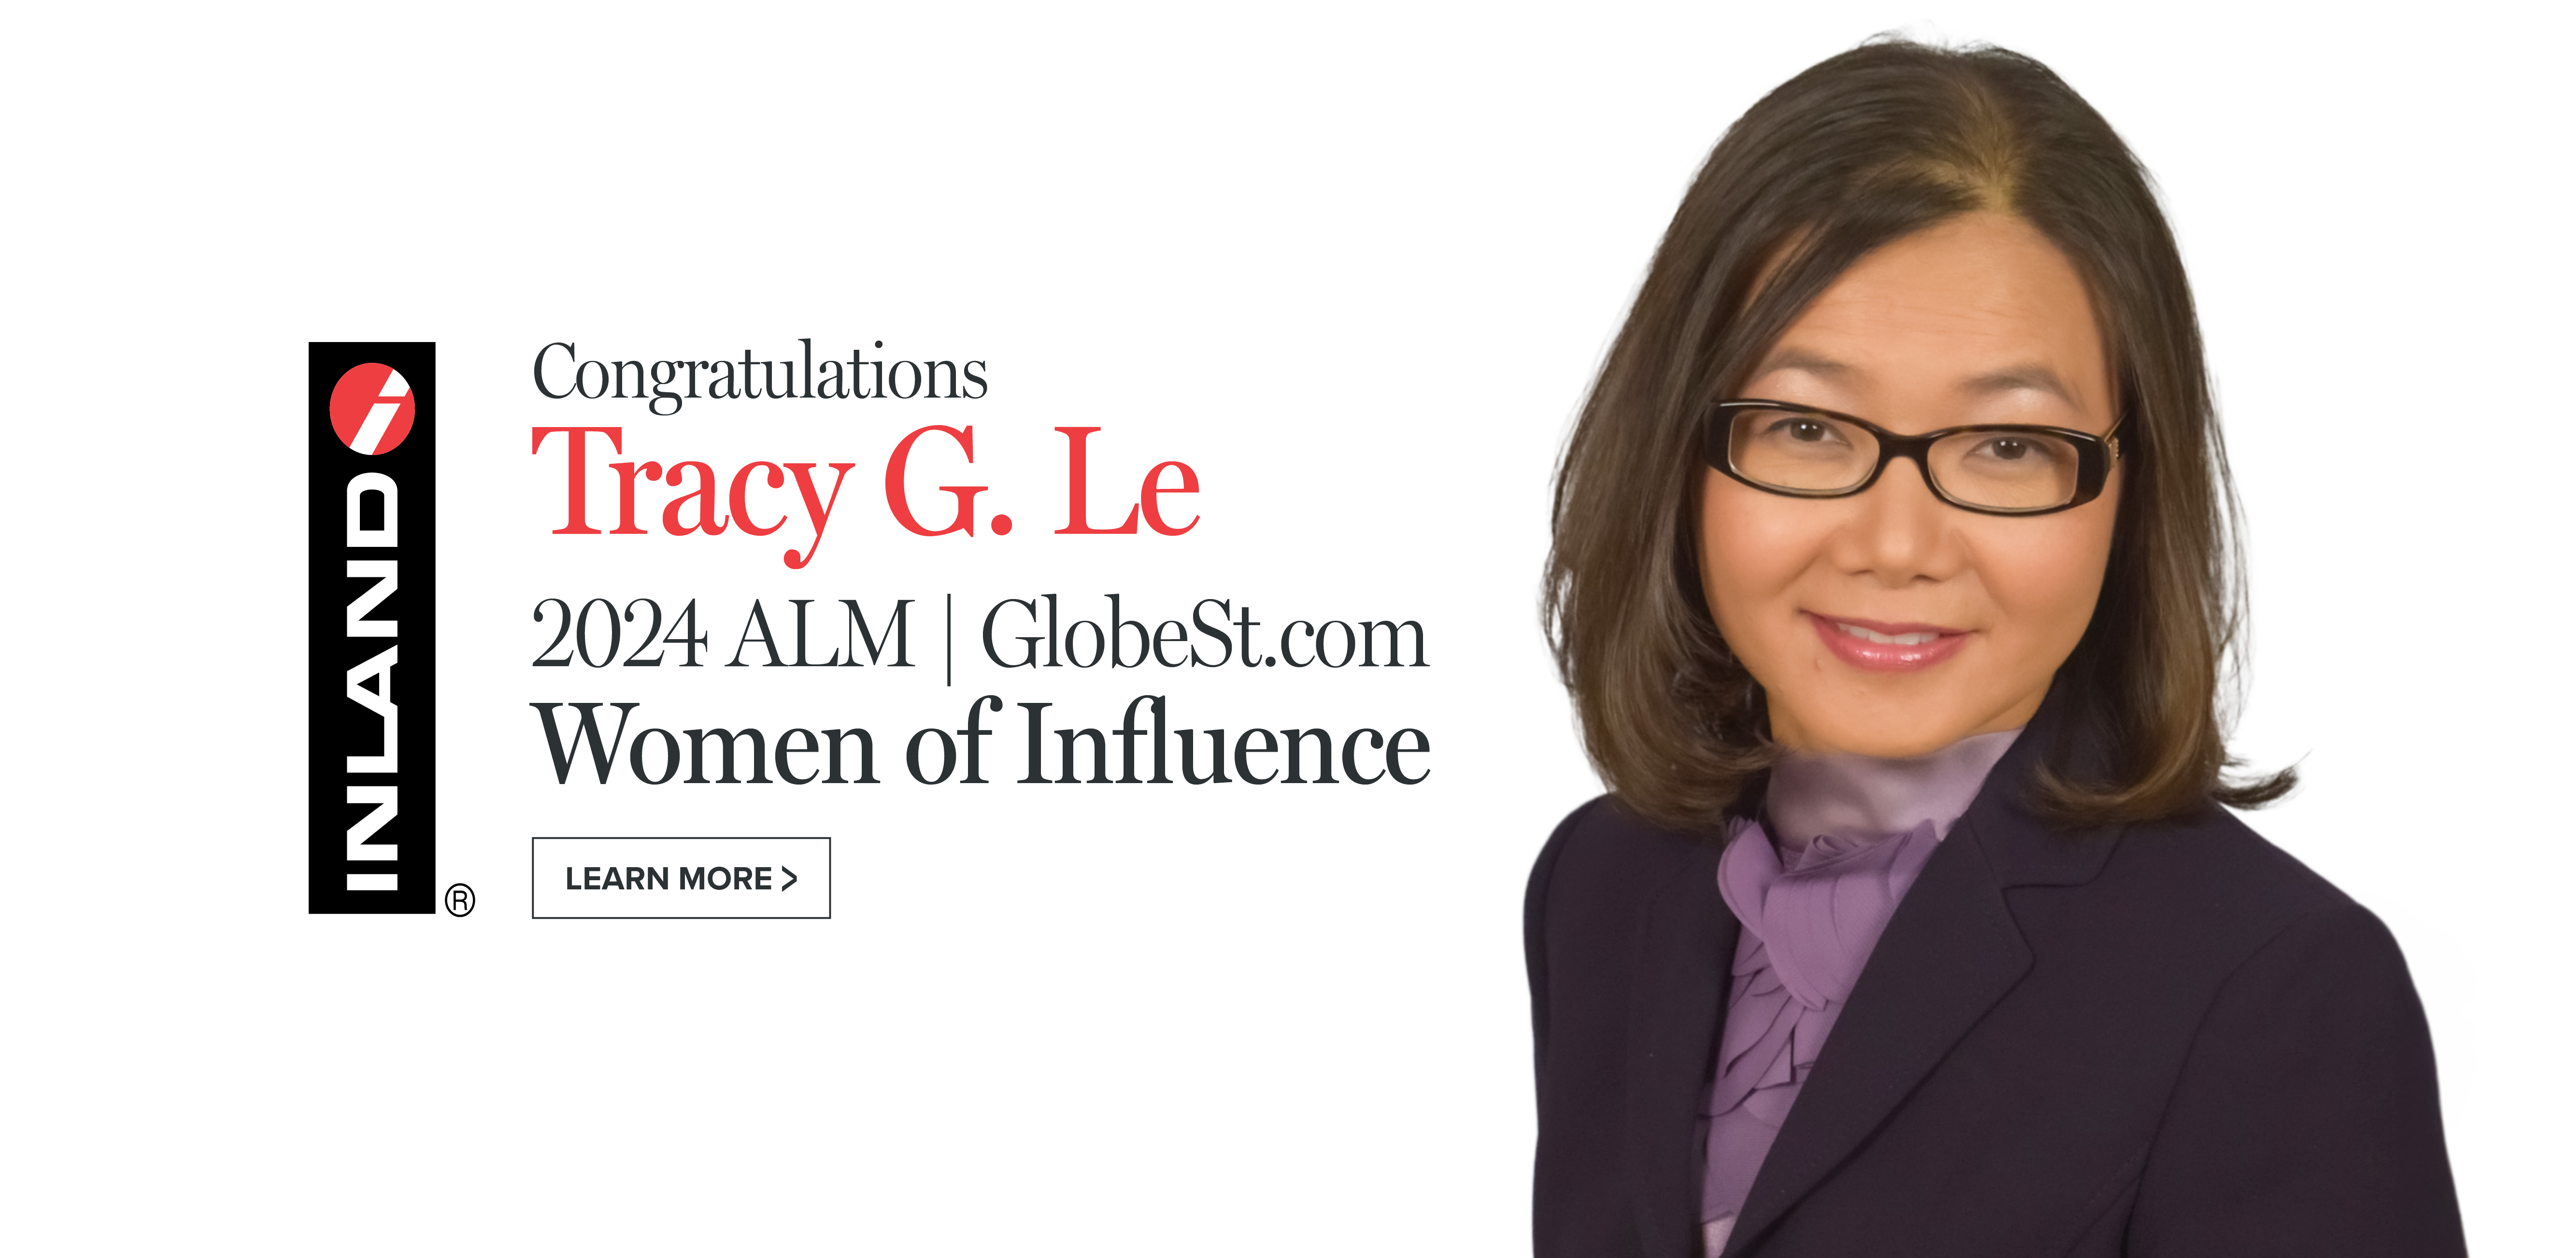 Tracy Le Named Woman of Inlfluence GlobeSt.com